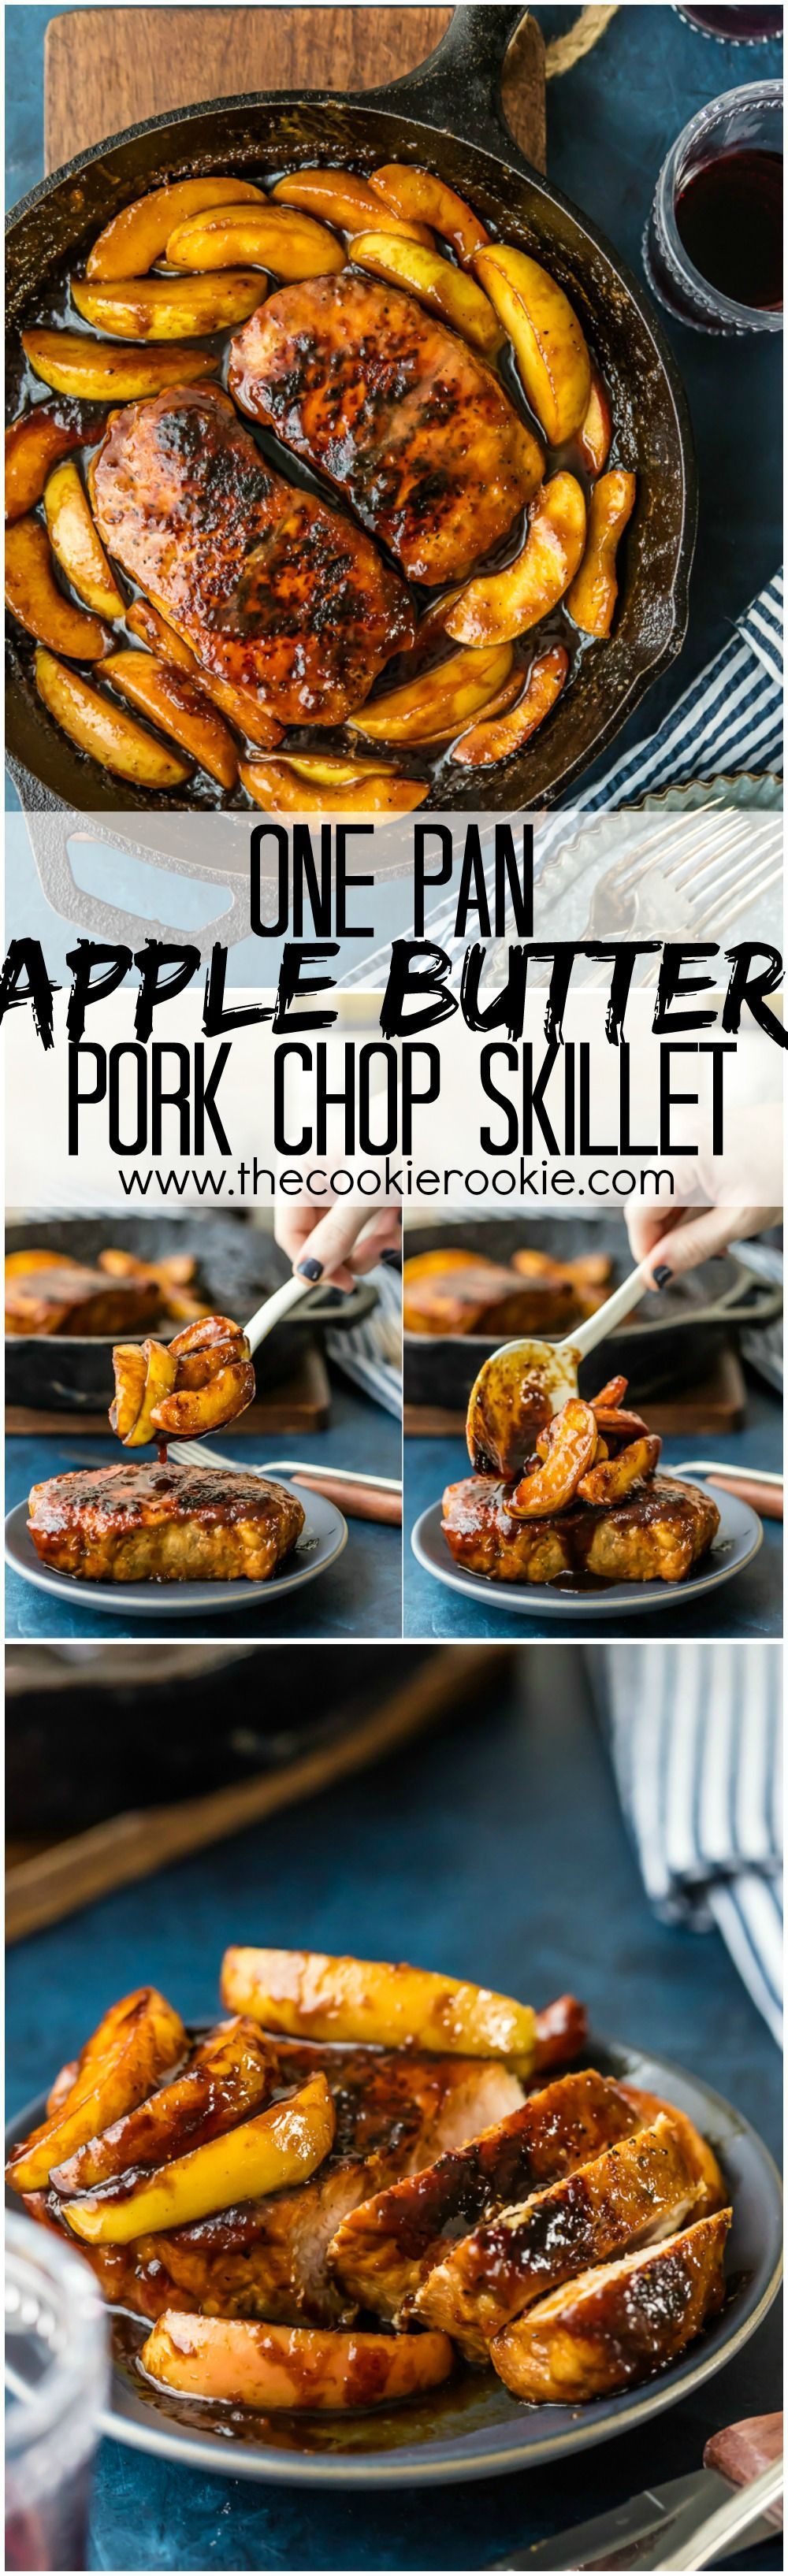 One Pan Apple Butter Pork Chop Skillet…the perfect recipe for Fall and Winter! One bonus…only ONE PAN to clean! Wow your